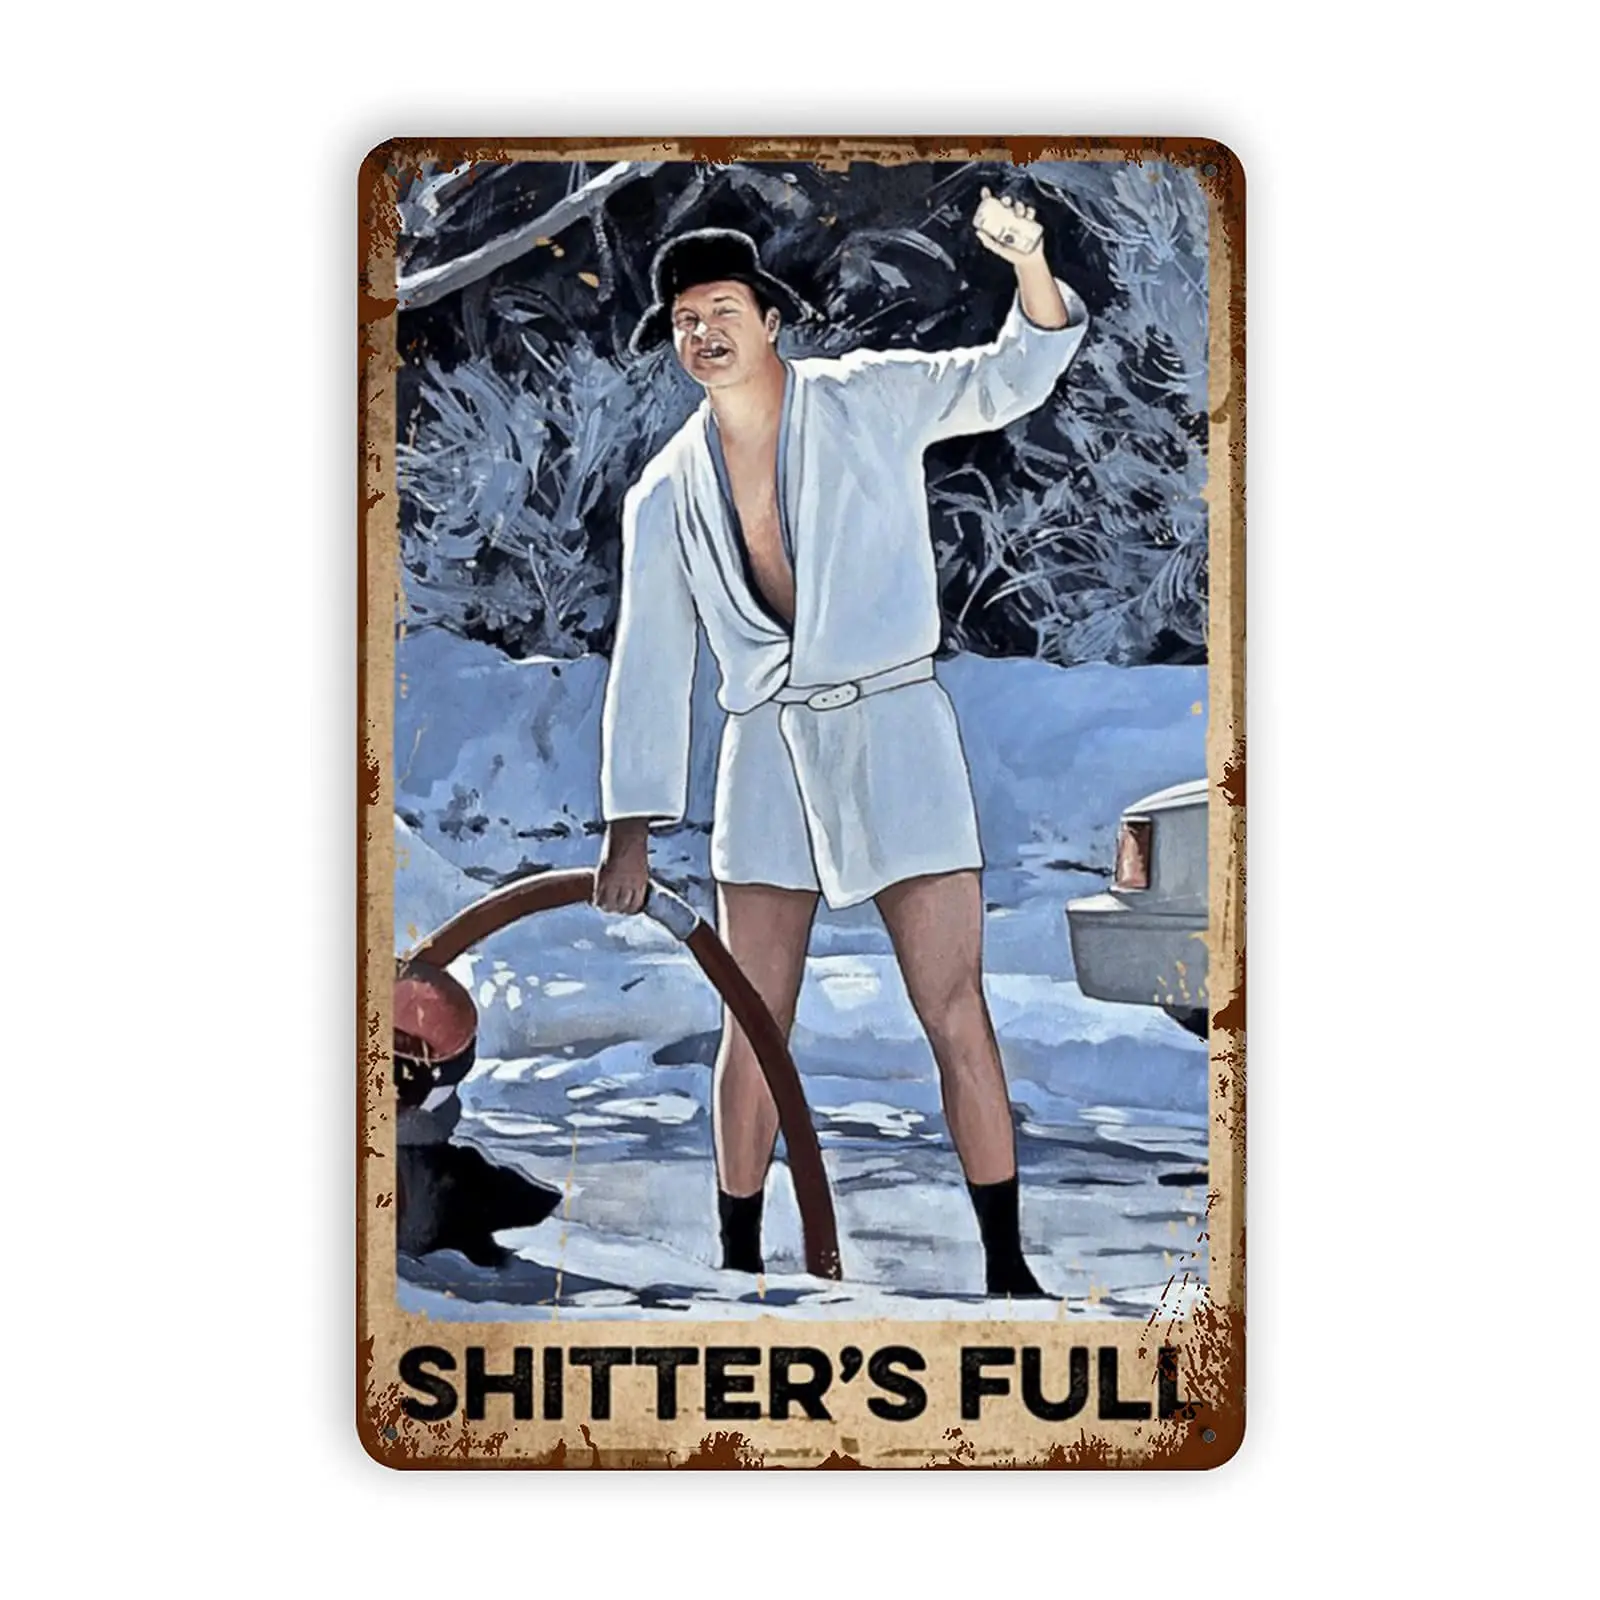 

PPFINE Shitter's Full Metal Retro Tin Signs, Funny Wall Decor Vintage Art Tin Sign Wall Plaque Posters for Home Bar Pub Cafe